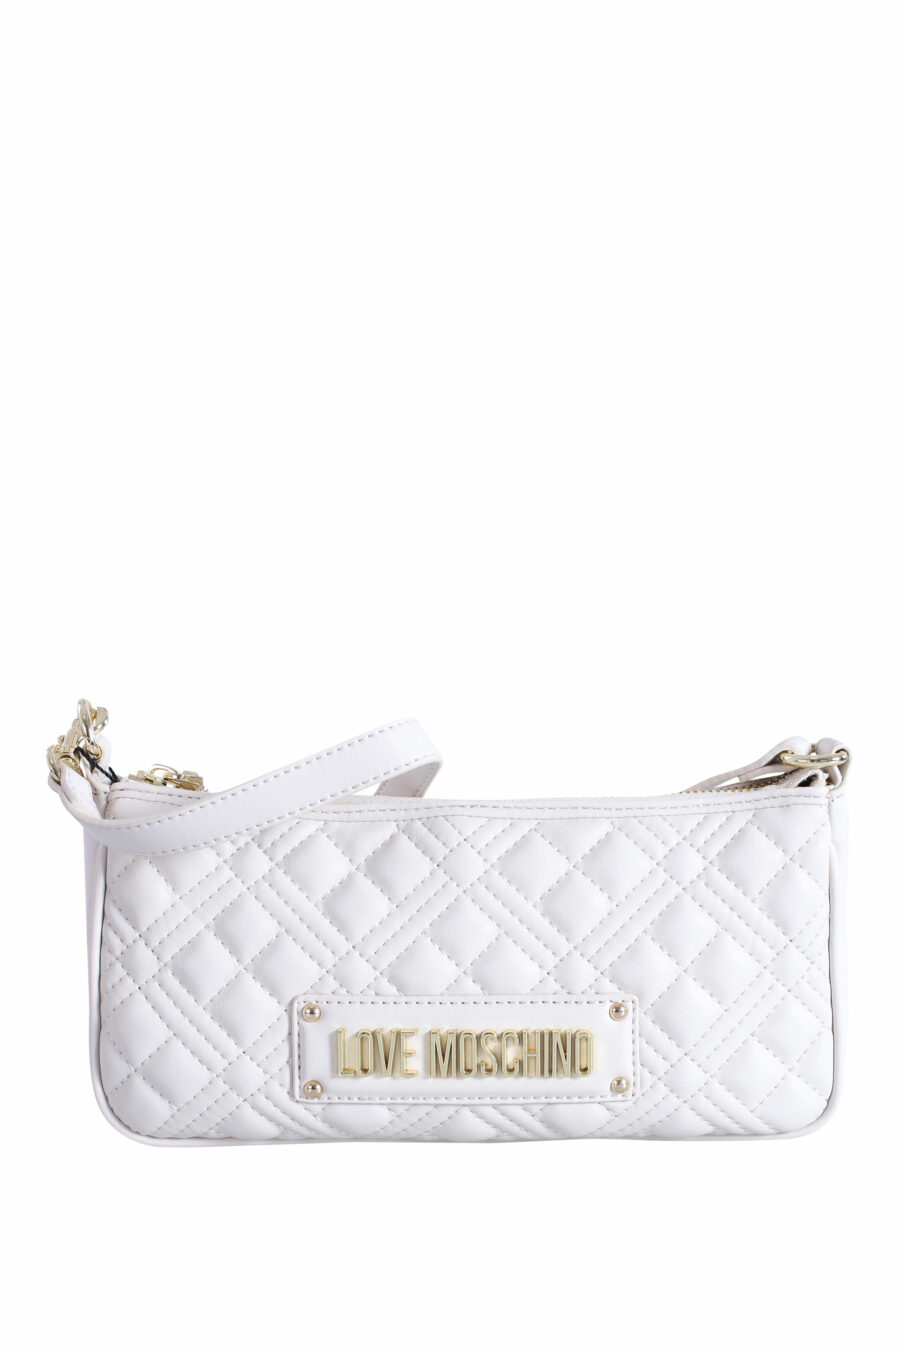 White quilted shoulder bag with gold logo - IMG 2891